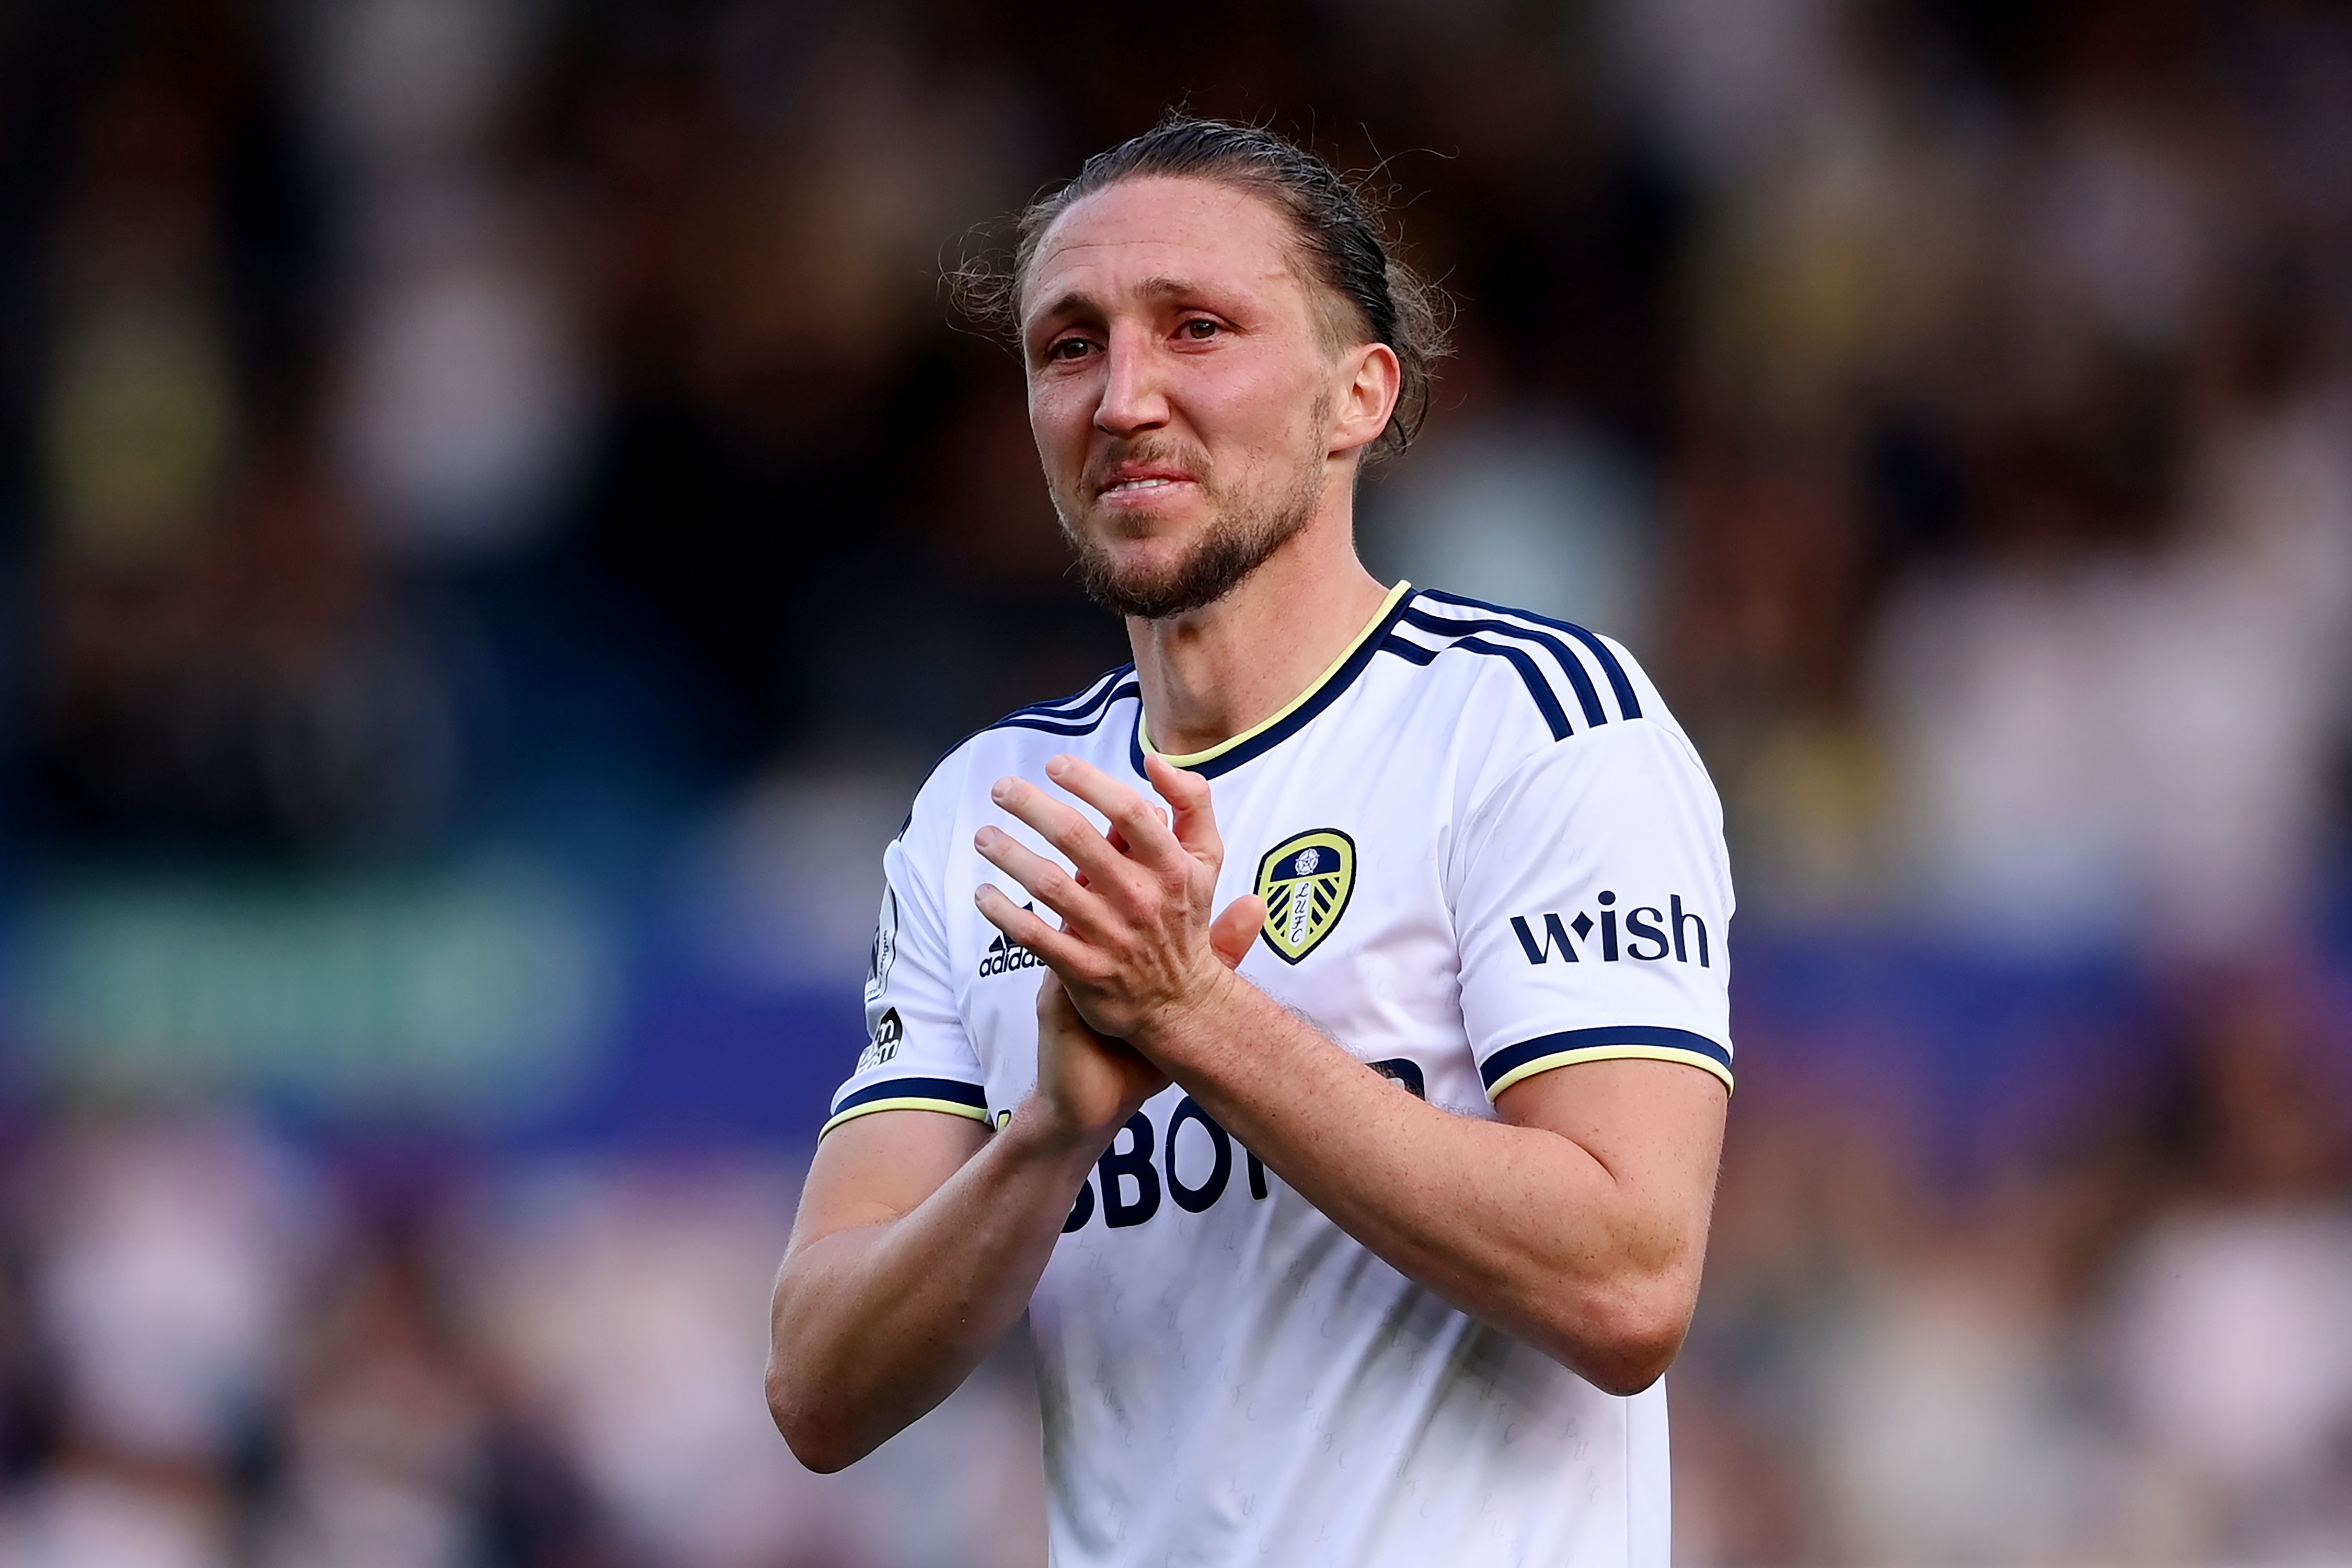 Luke Ayling of Leeds United looks dejected after their relegation to the Championship.